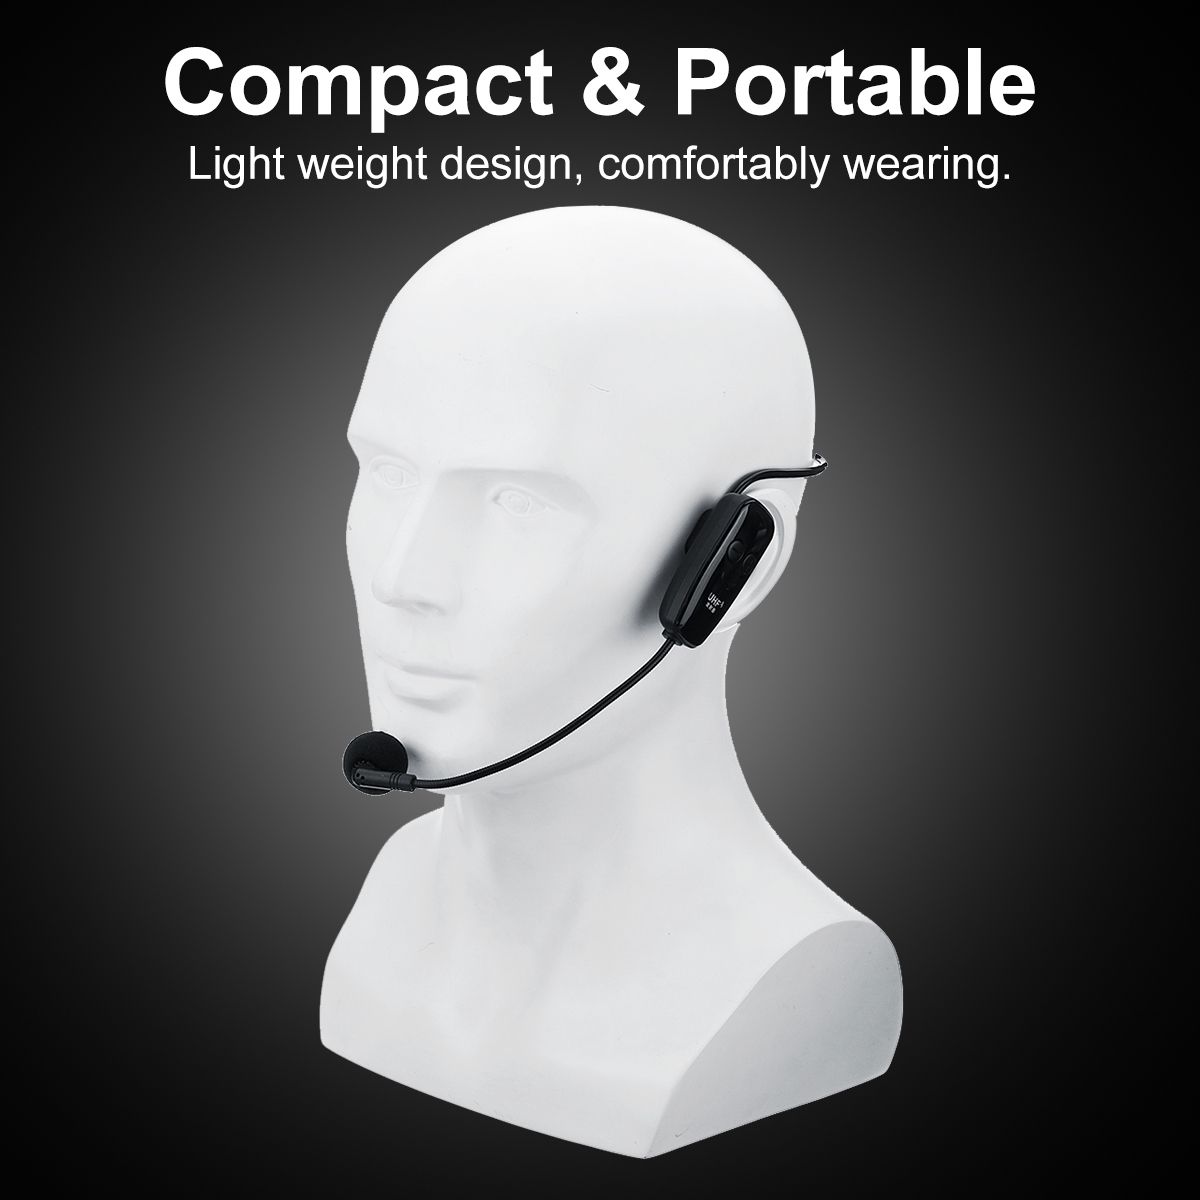 UHF-2-in-1-24G-Wireless-Mic-Headset-Noise-Cancelling-Microphone-with-Receiver-Plug-Stable-Sign-Recei-1590336